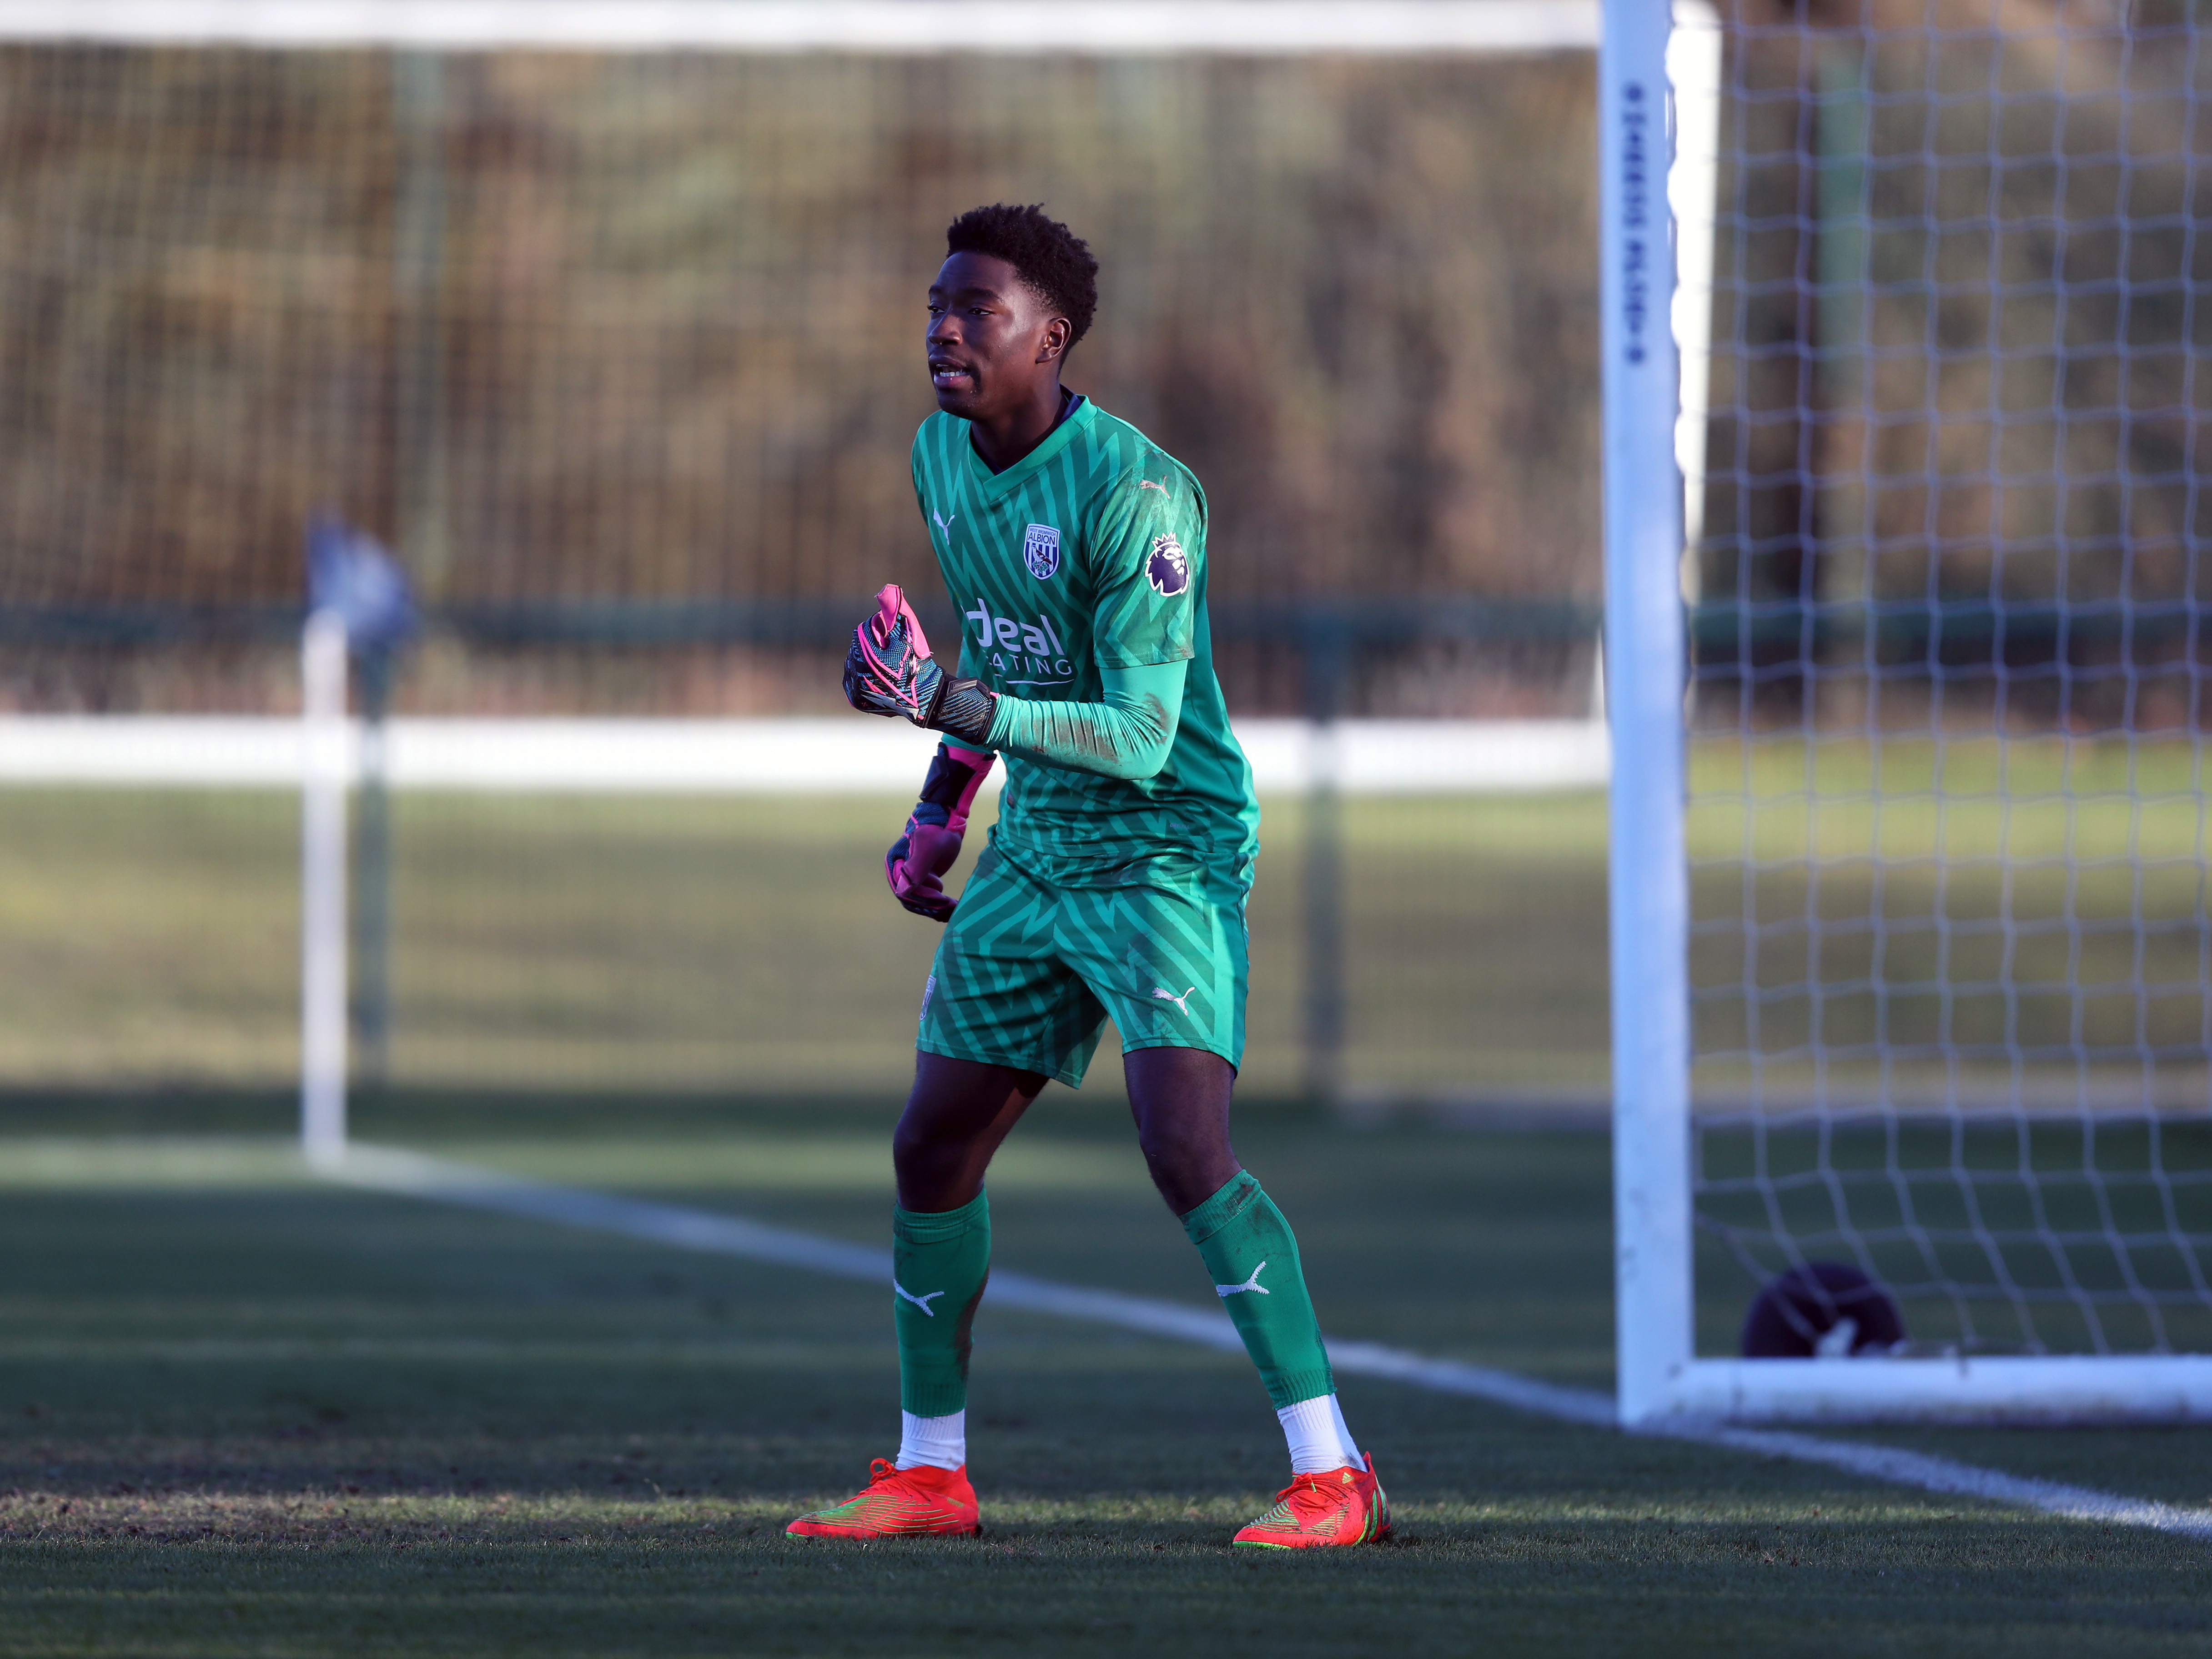 A photo of Albion academy goalkeeper Ben Cisse in action for the PL2 team at the club's training ground